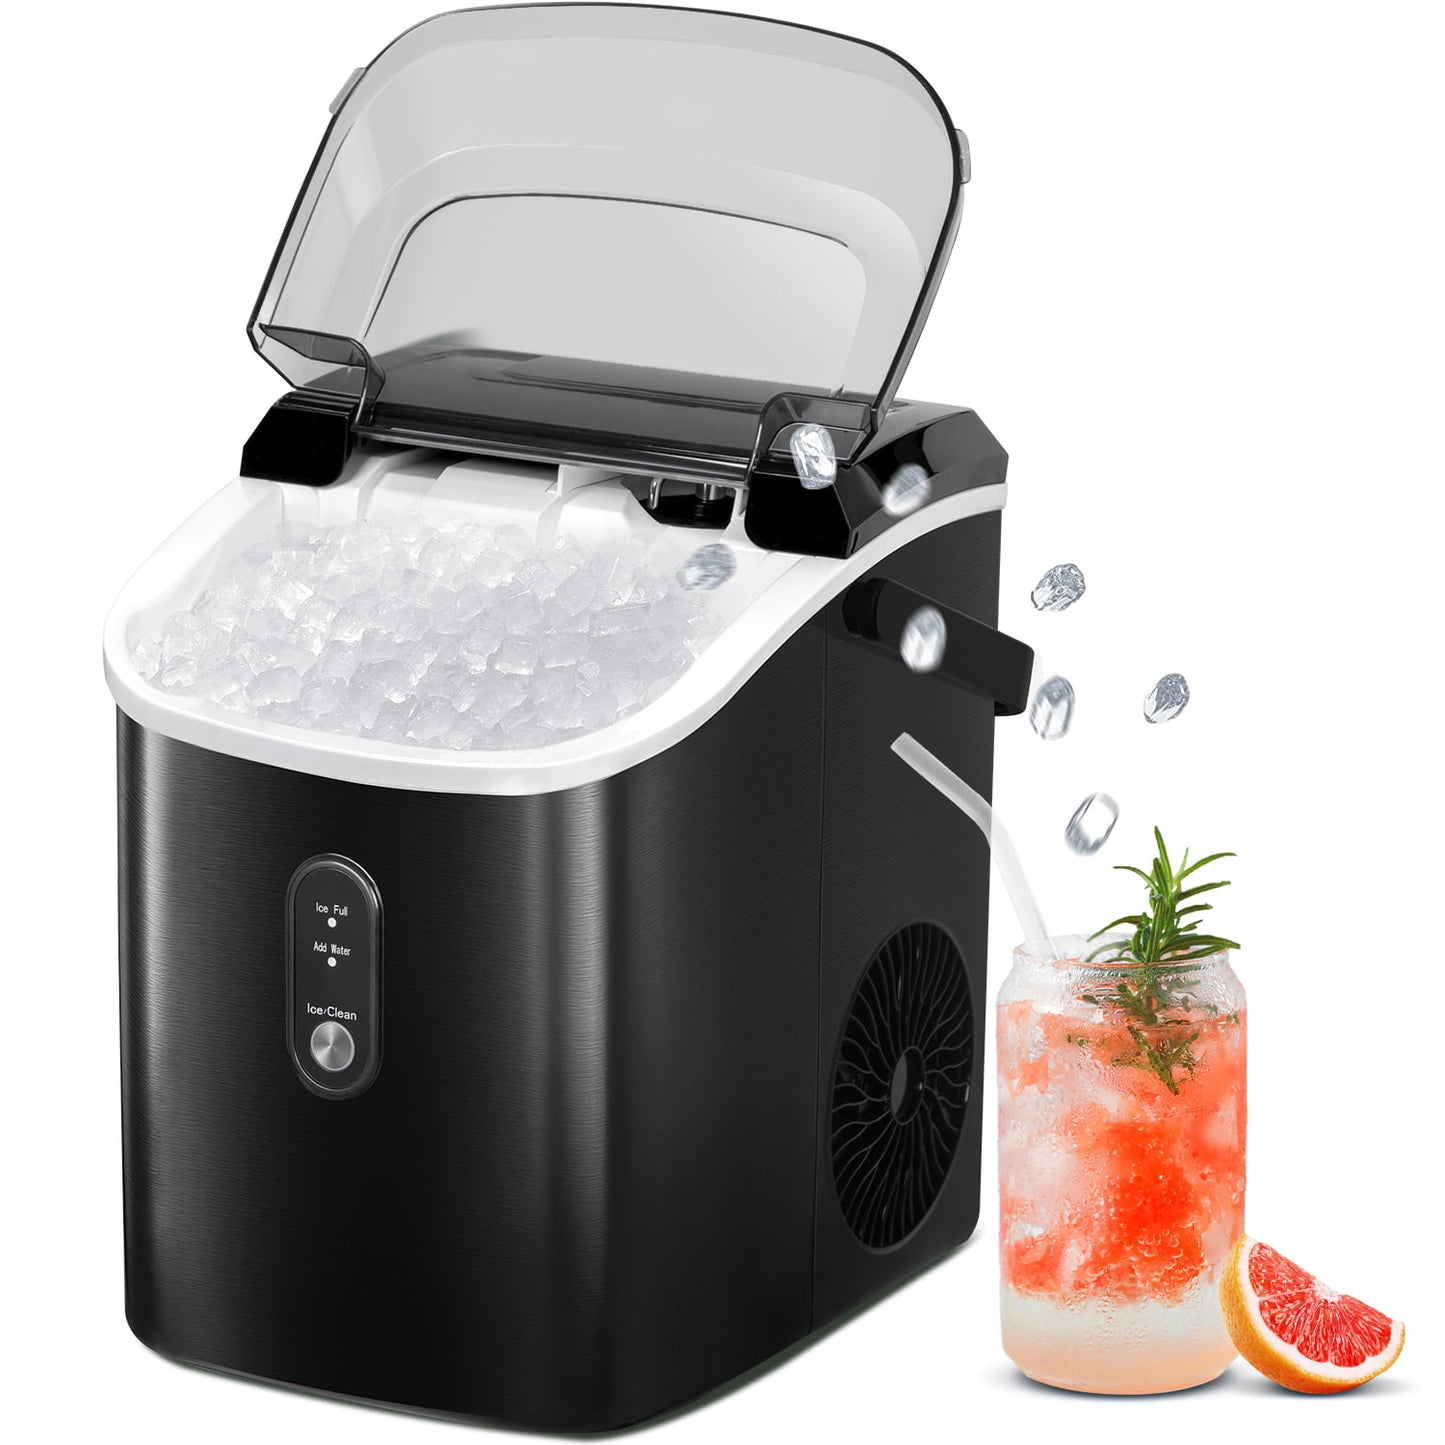  Havato Nugget Ice Maker Countertop, Auto-Cleaning